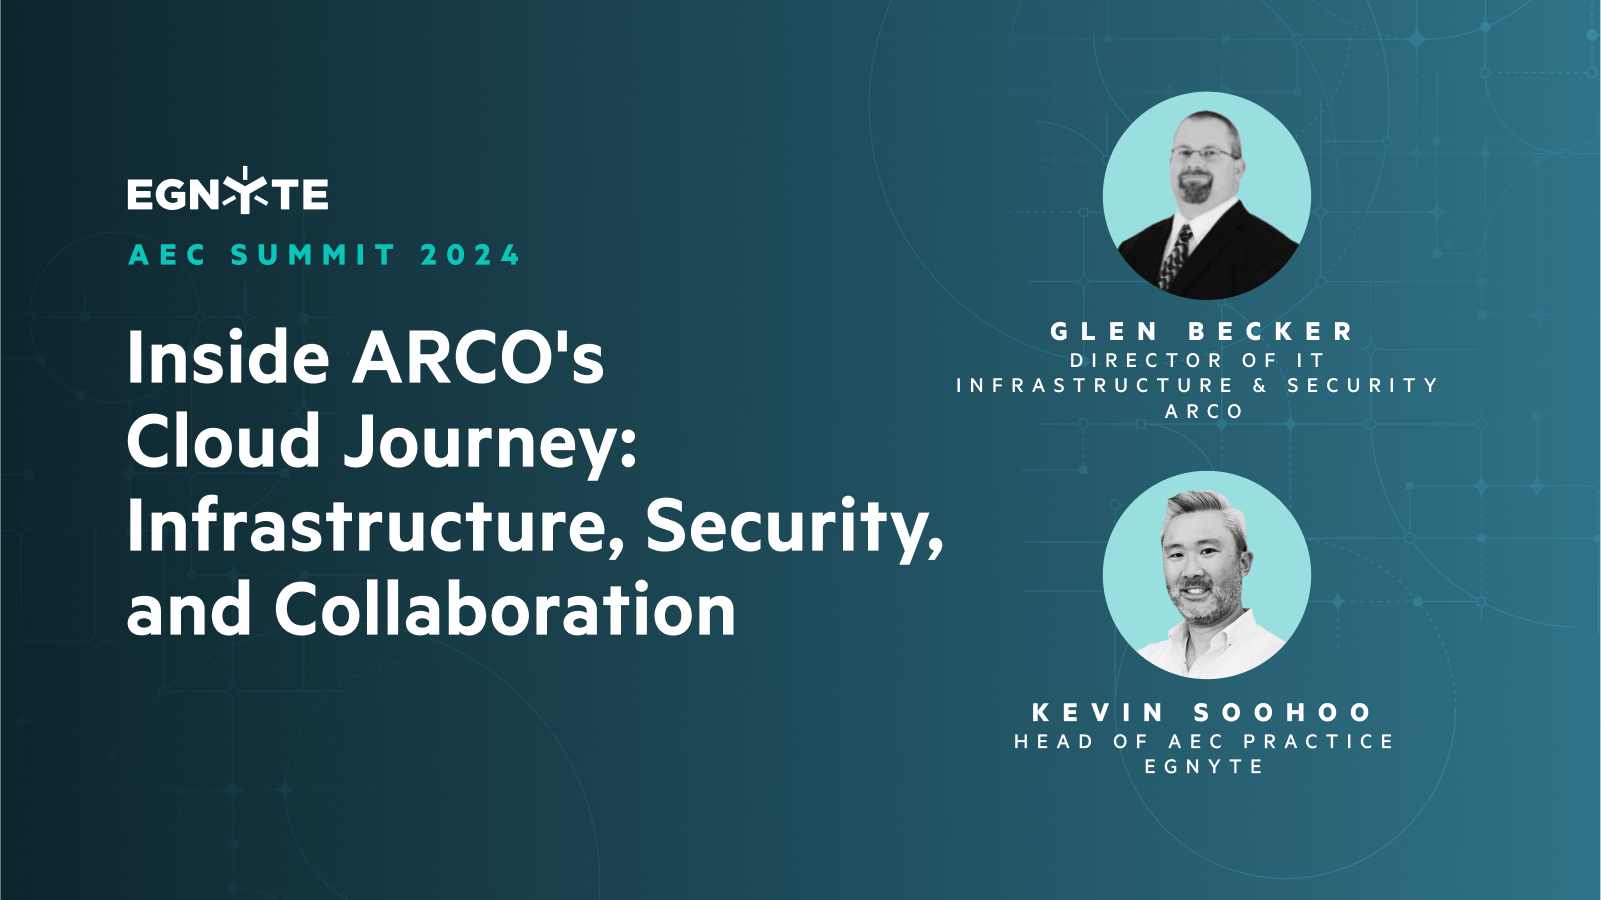 Inside Arco's Cloud Journey: Infrastructure, Security, and Collaboration